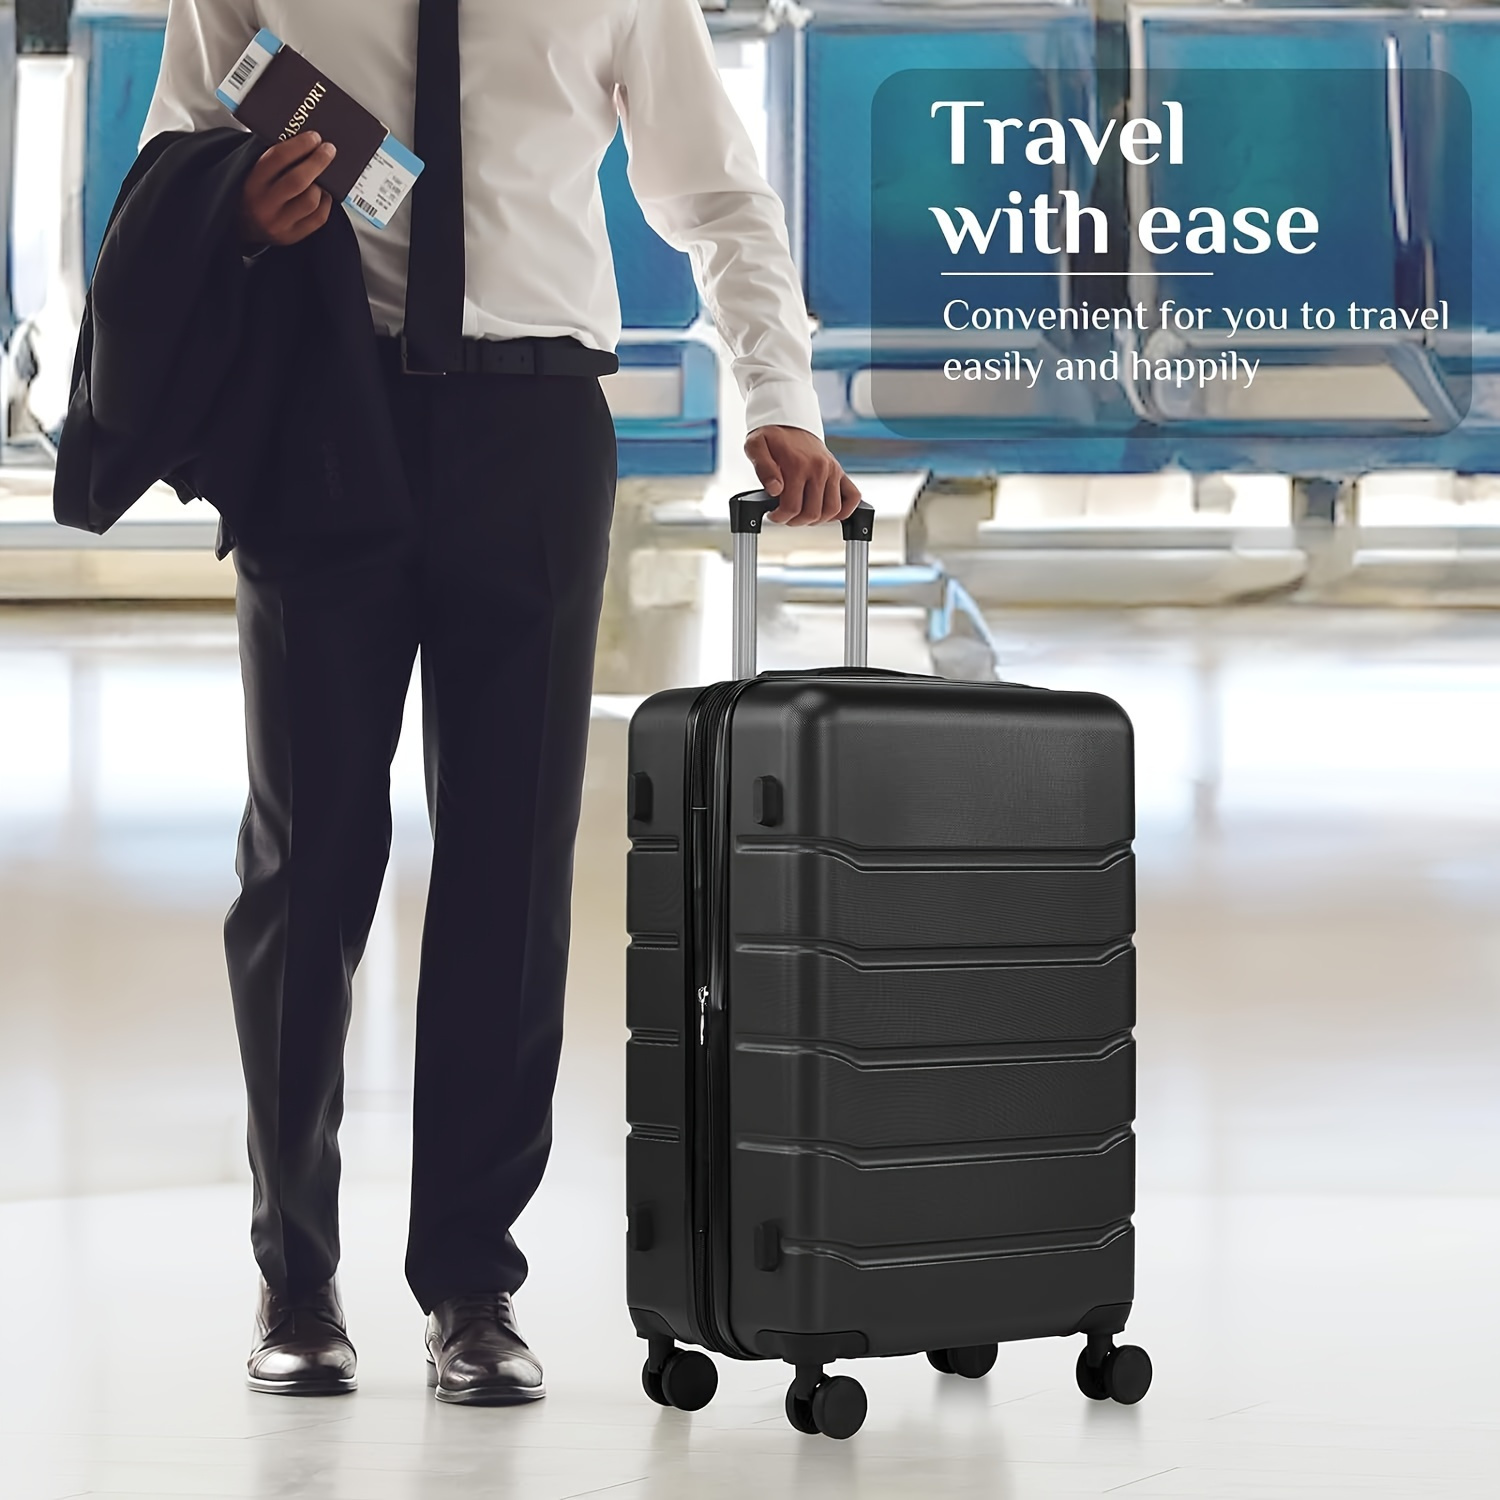 

Portable Luggage Suitcase With Tsa Lock, Carry On Lightweight Trolley Case, Travel Case With Double Spinner Wheels